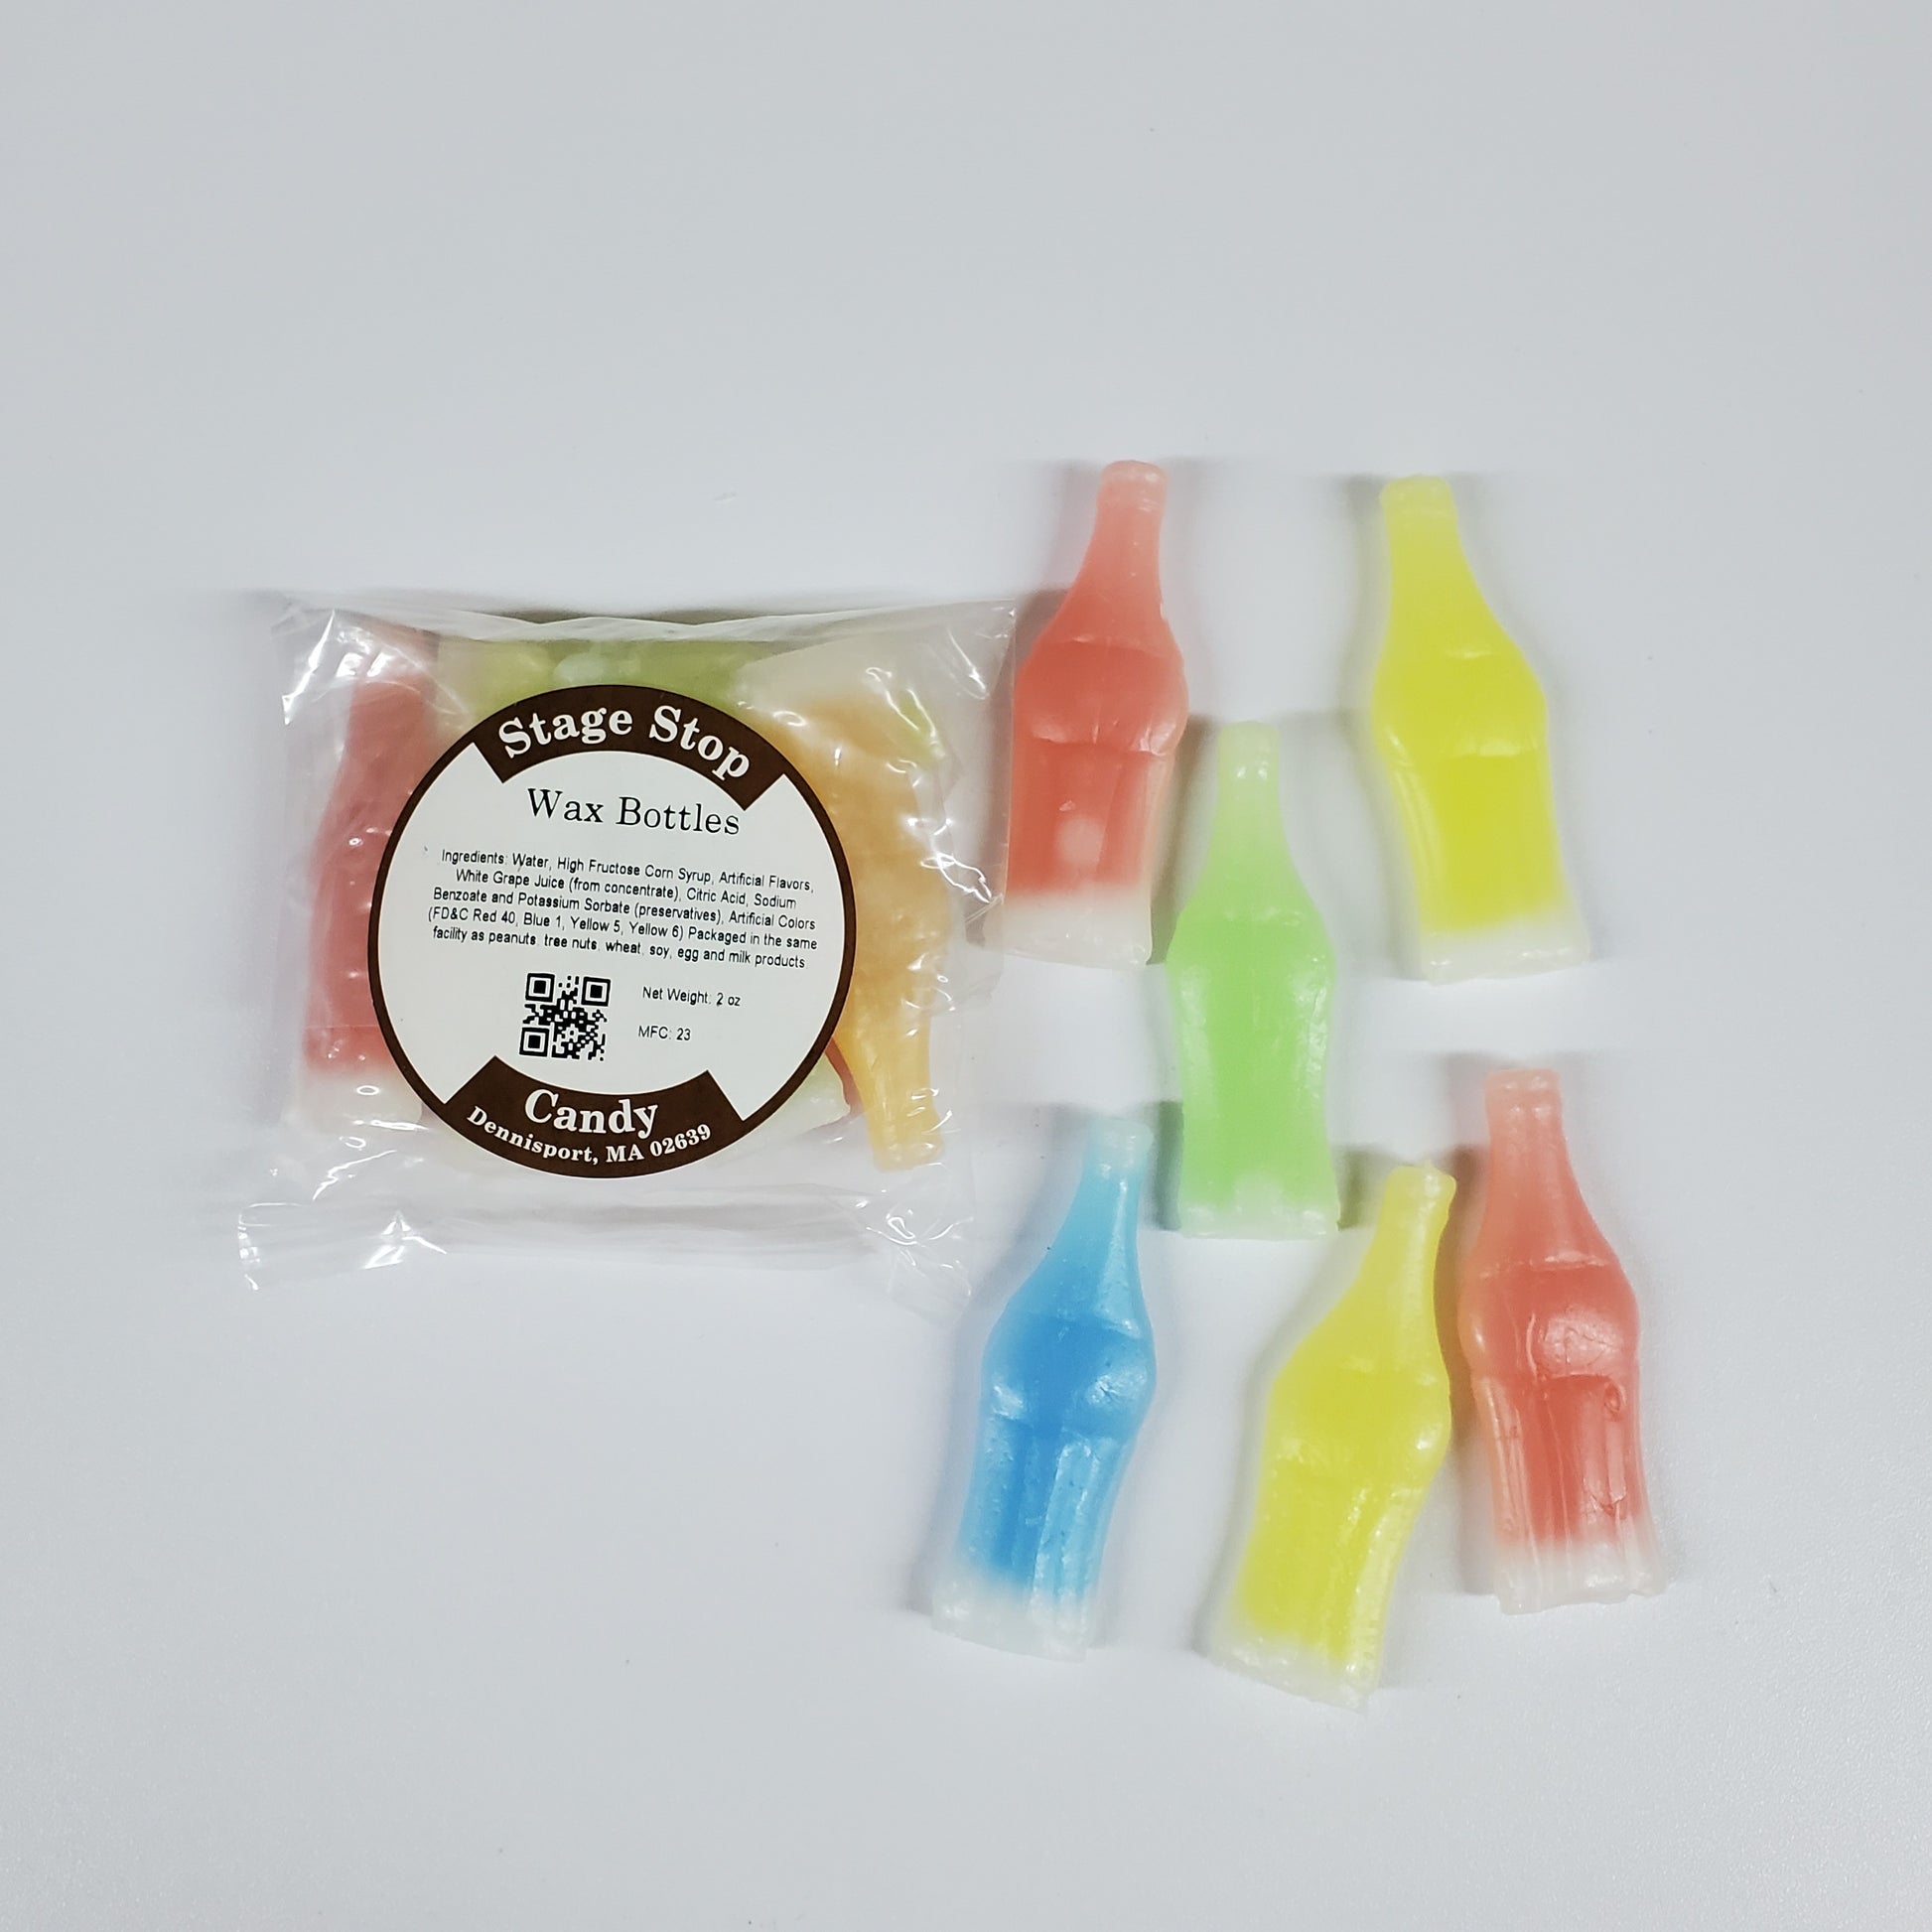 Assorted wax bottles in different flavors from Stage Stop Candy